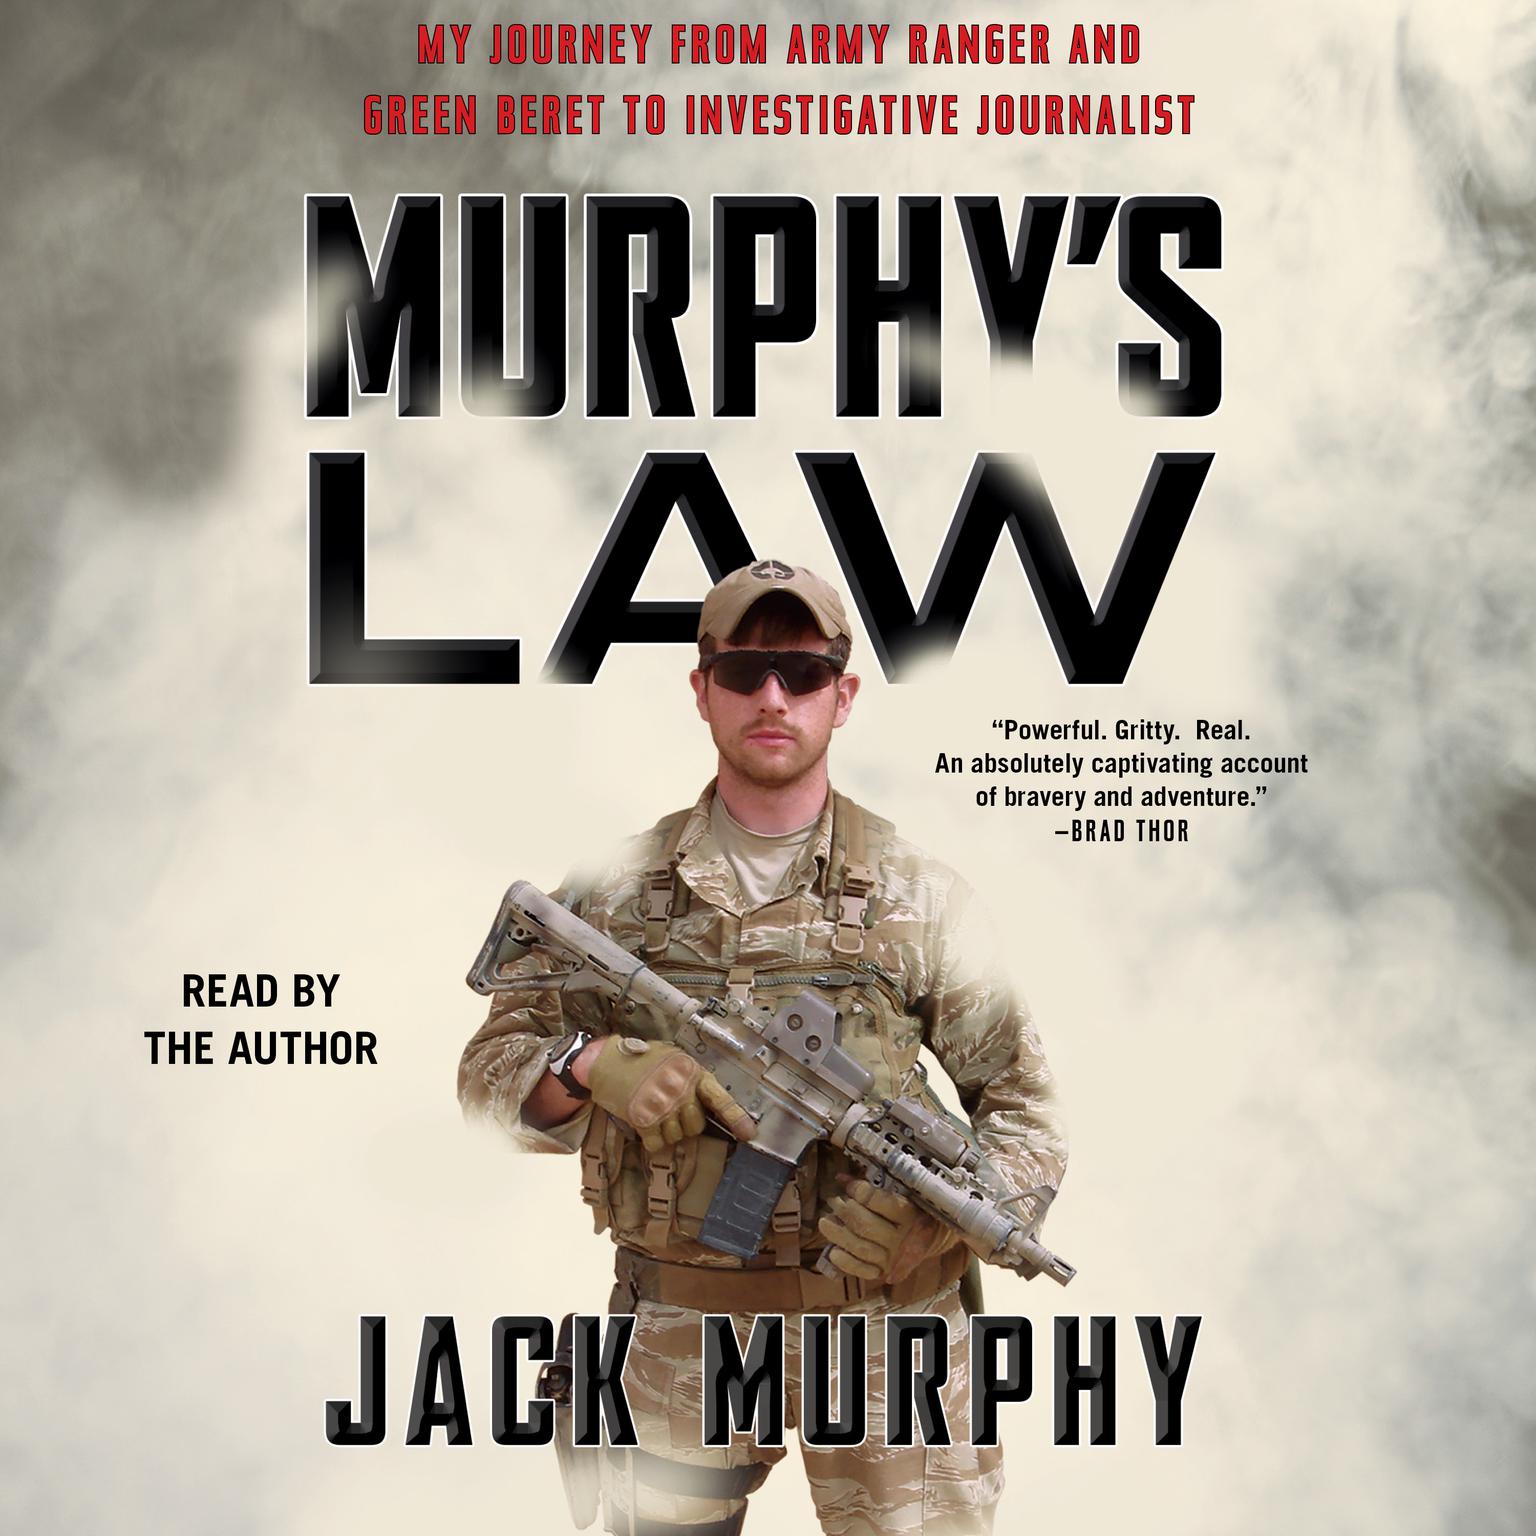 Murphys Law: My Journey from Army Ranger and Green Beret to Investigative Journalist Audiobook, by Jack Murphy